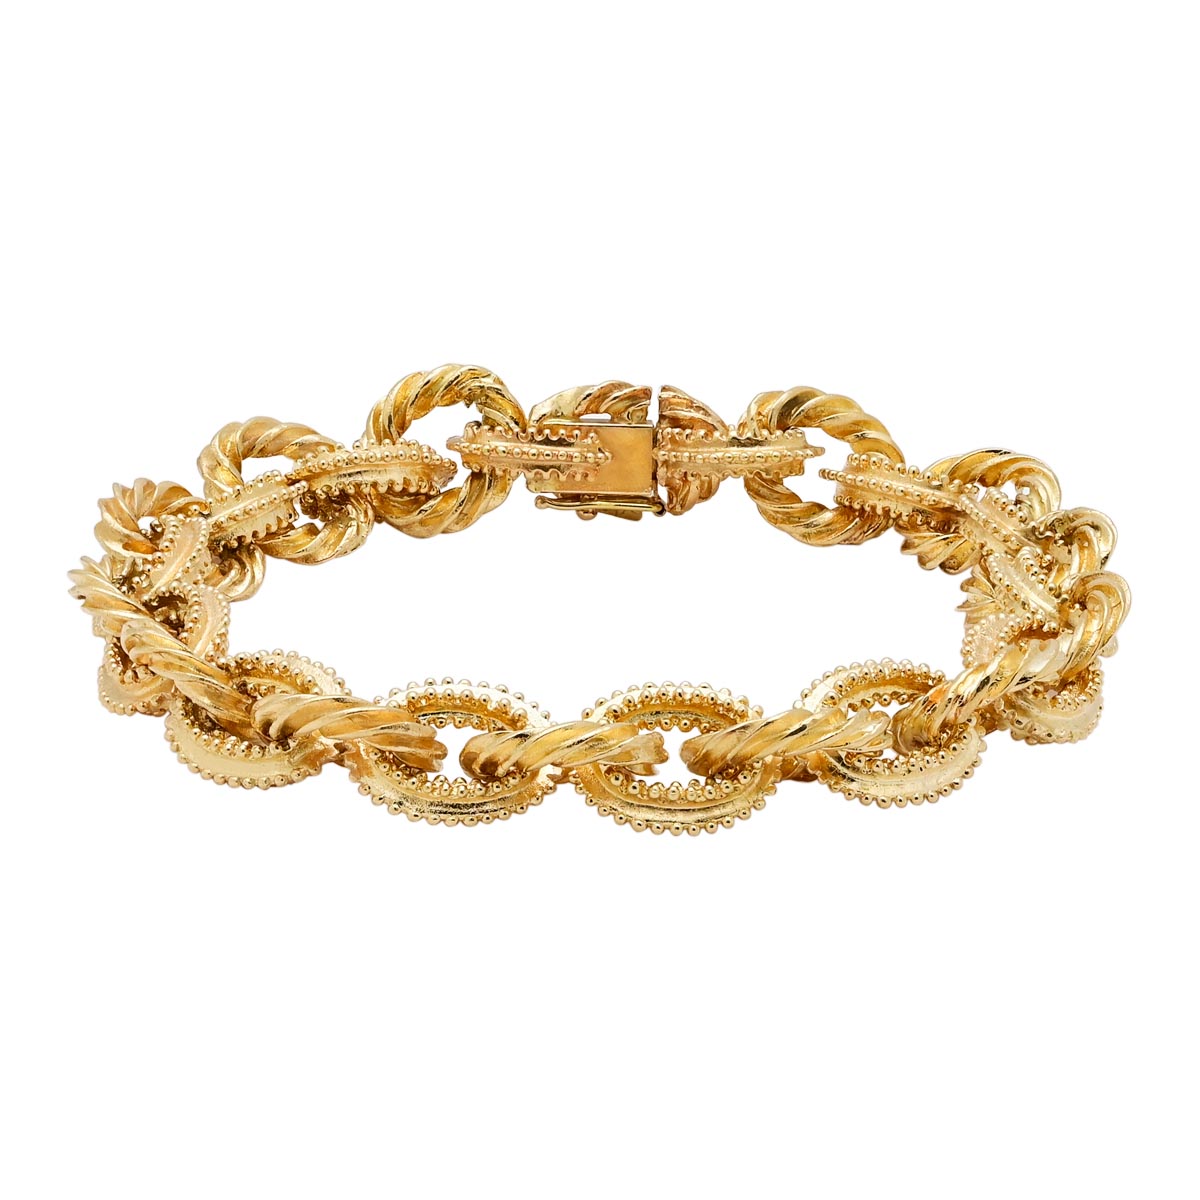 Estate Fancy Oval Link Bracelet in 14kt Yellow Gold (7.5 inches)